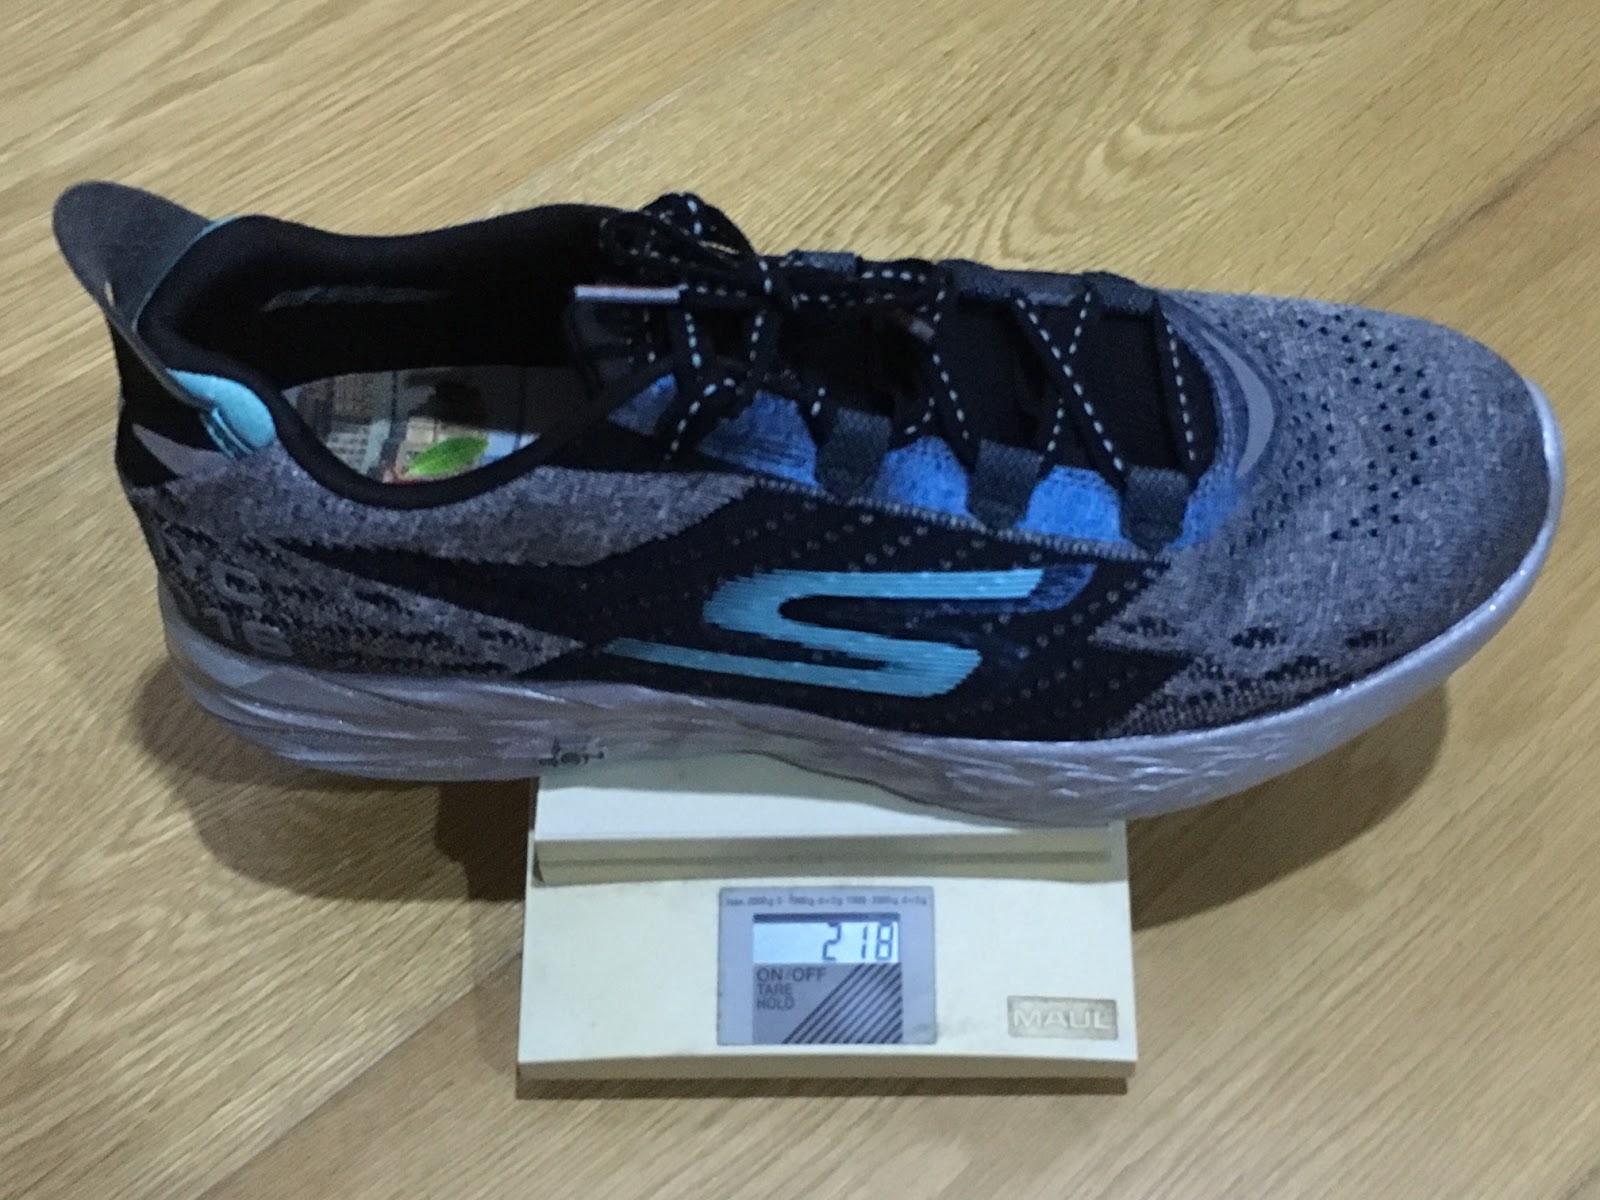 Road Trail Run: Impressions Review: Skechers Performance 5